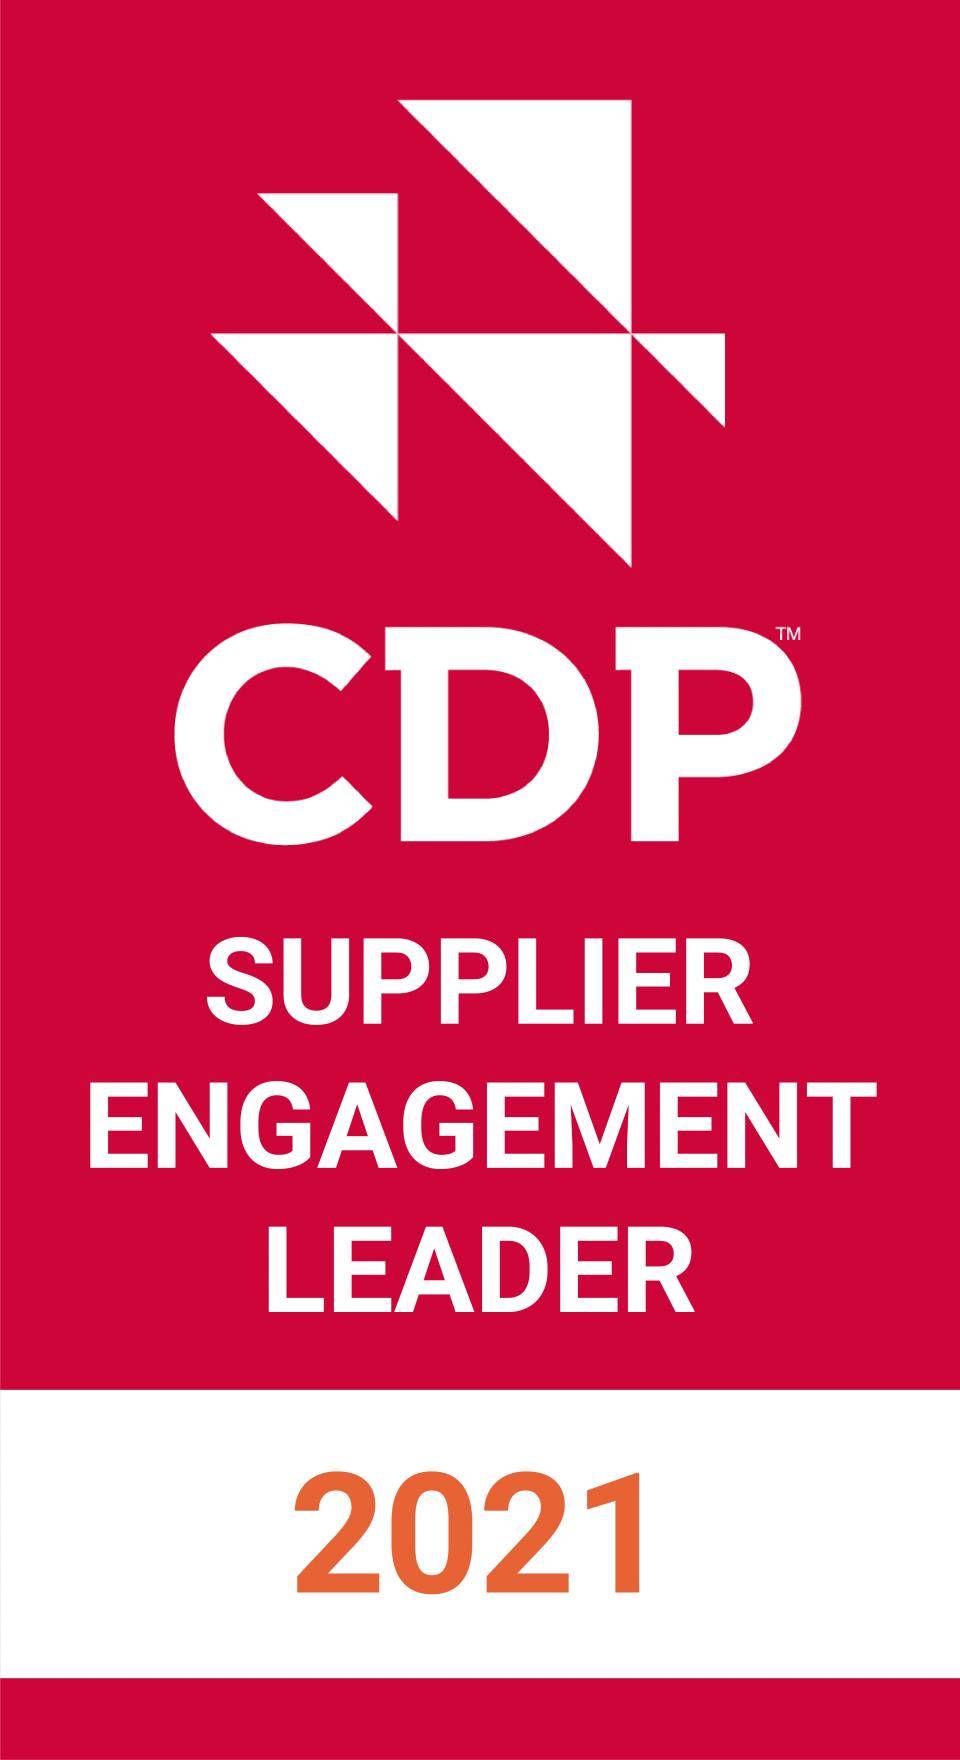 Barry Callebaut awarded by CDP as a Supplier Engagement Leader